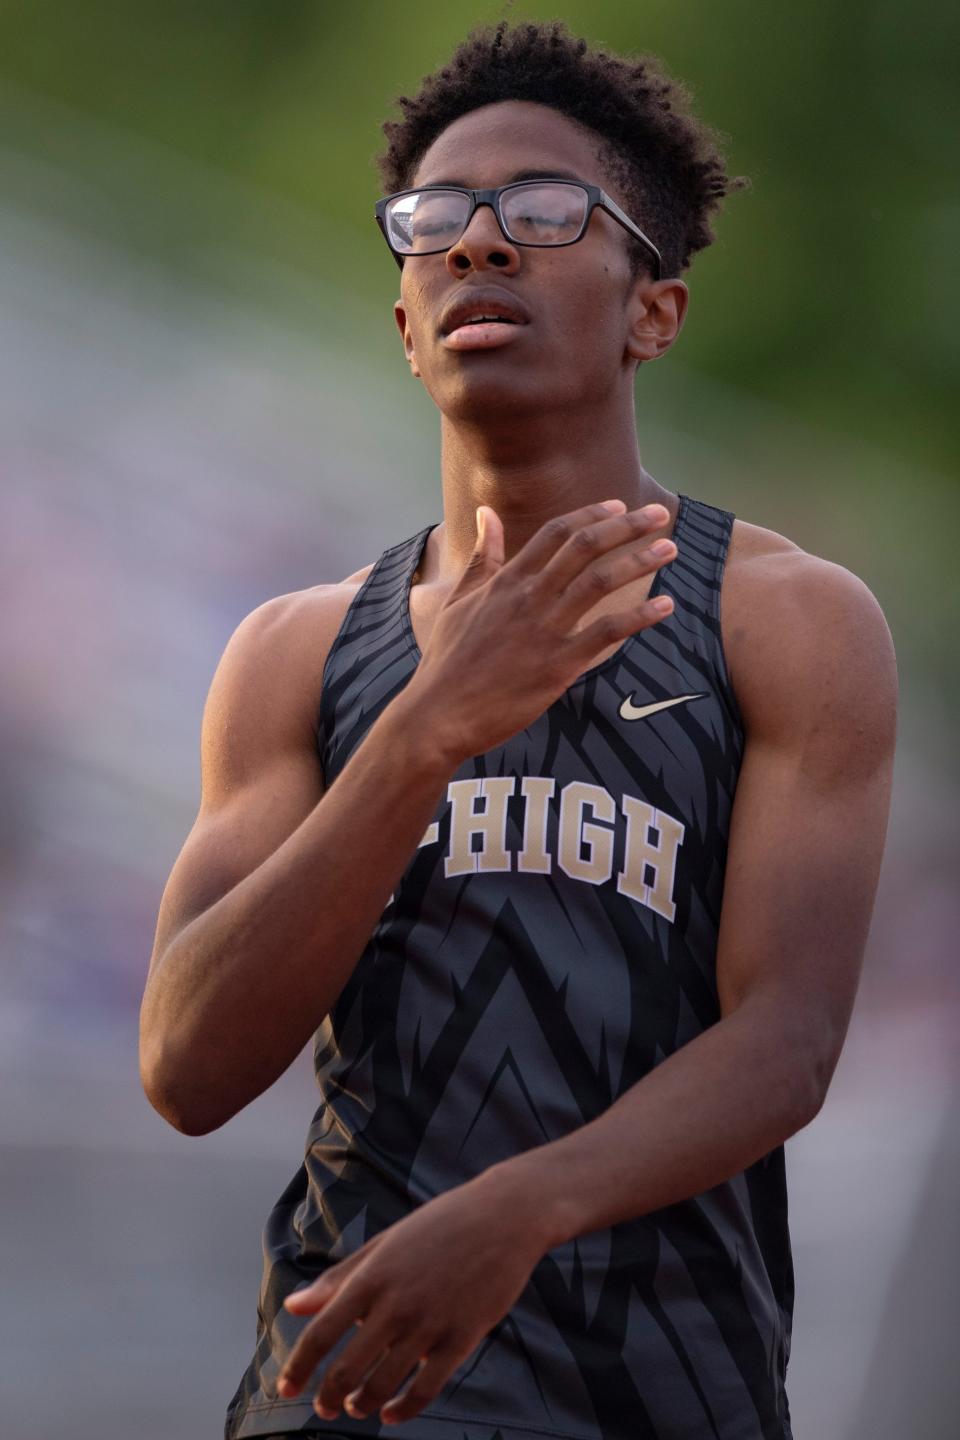 Topeka High's V’Ante Peoples reacts after competing in the 200 meter dash during 6A regionals Thursday at Hummer Sports Park.